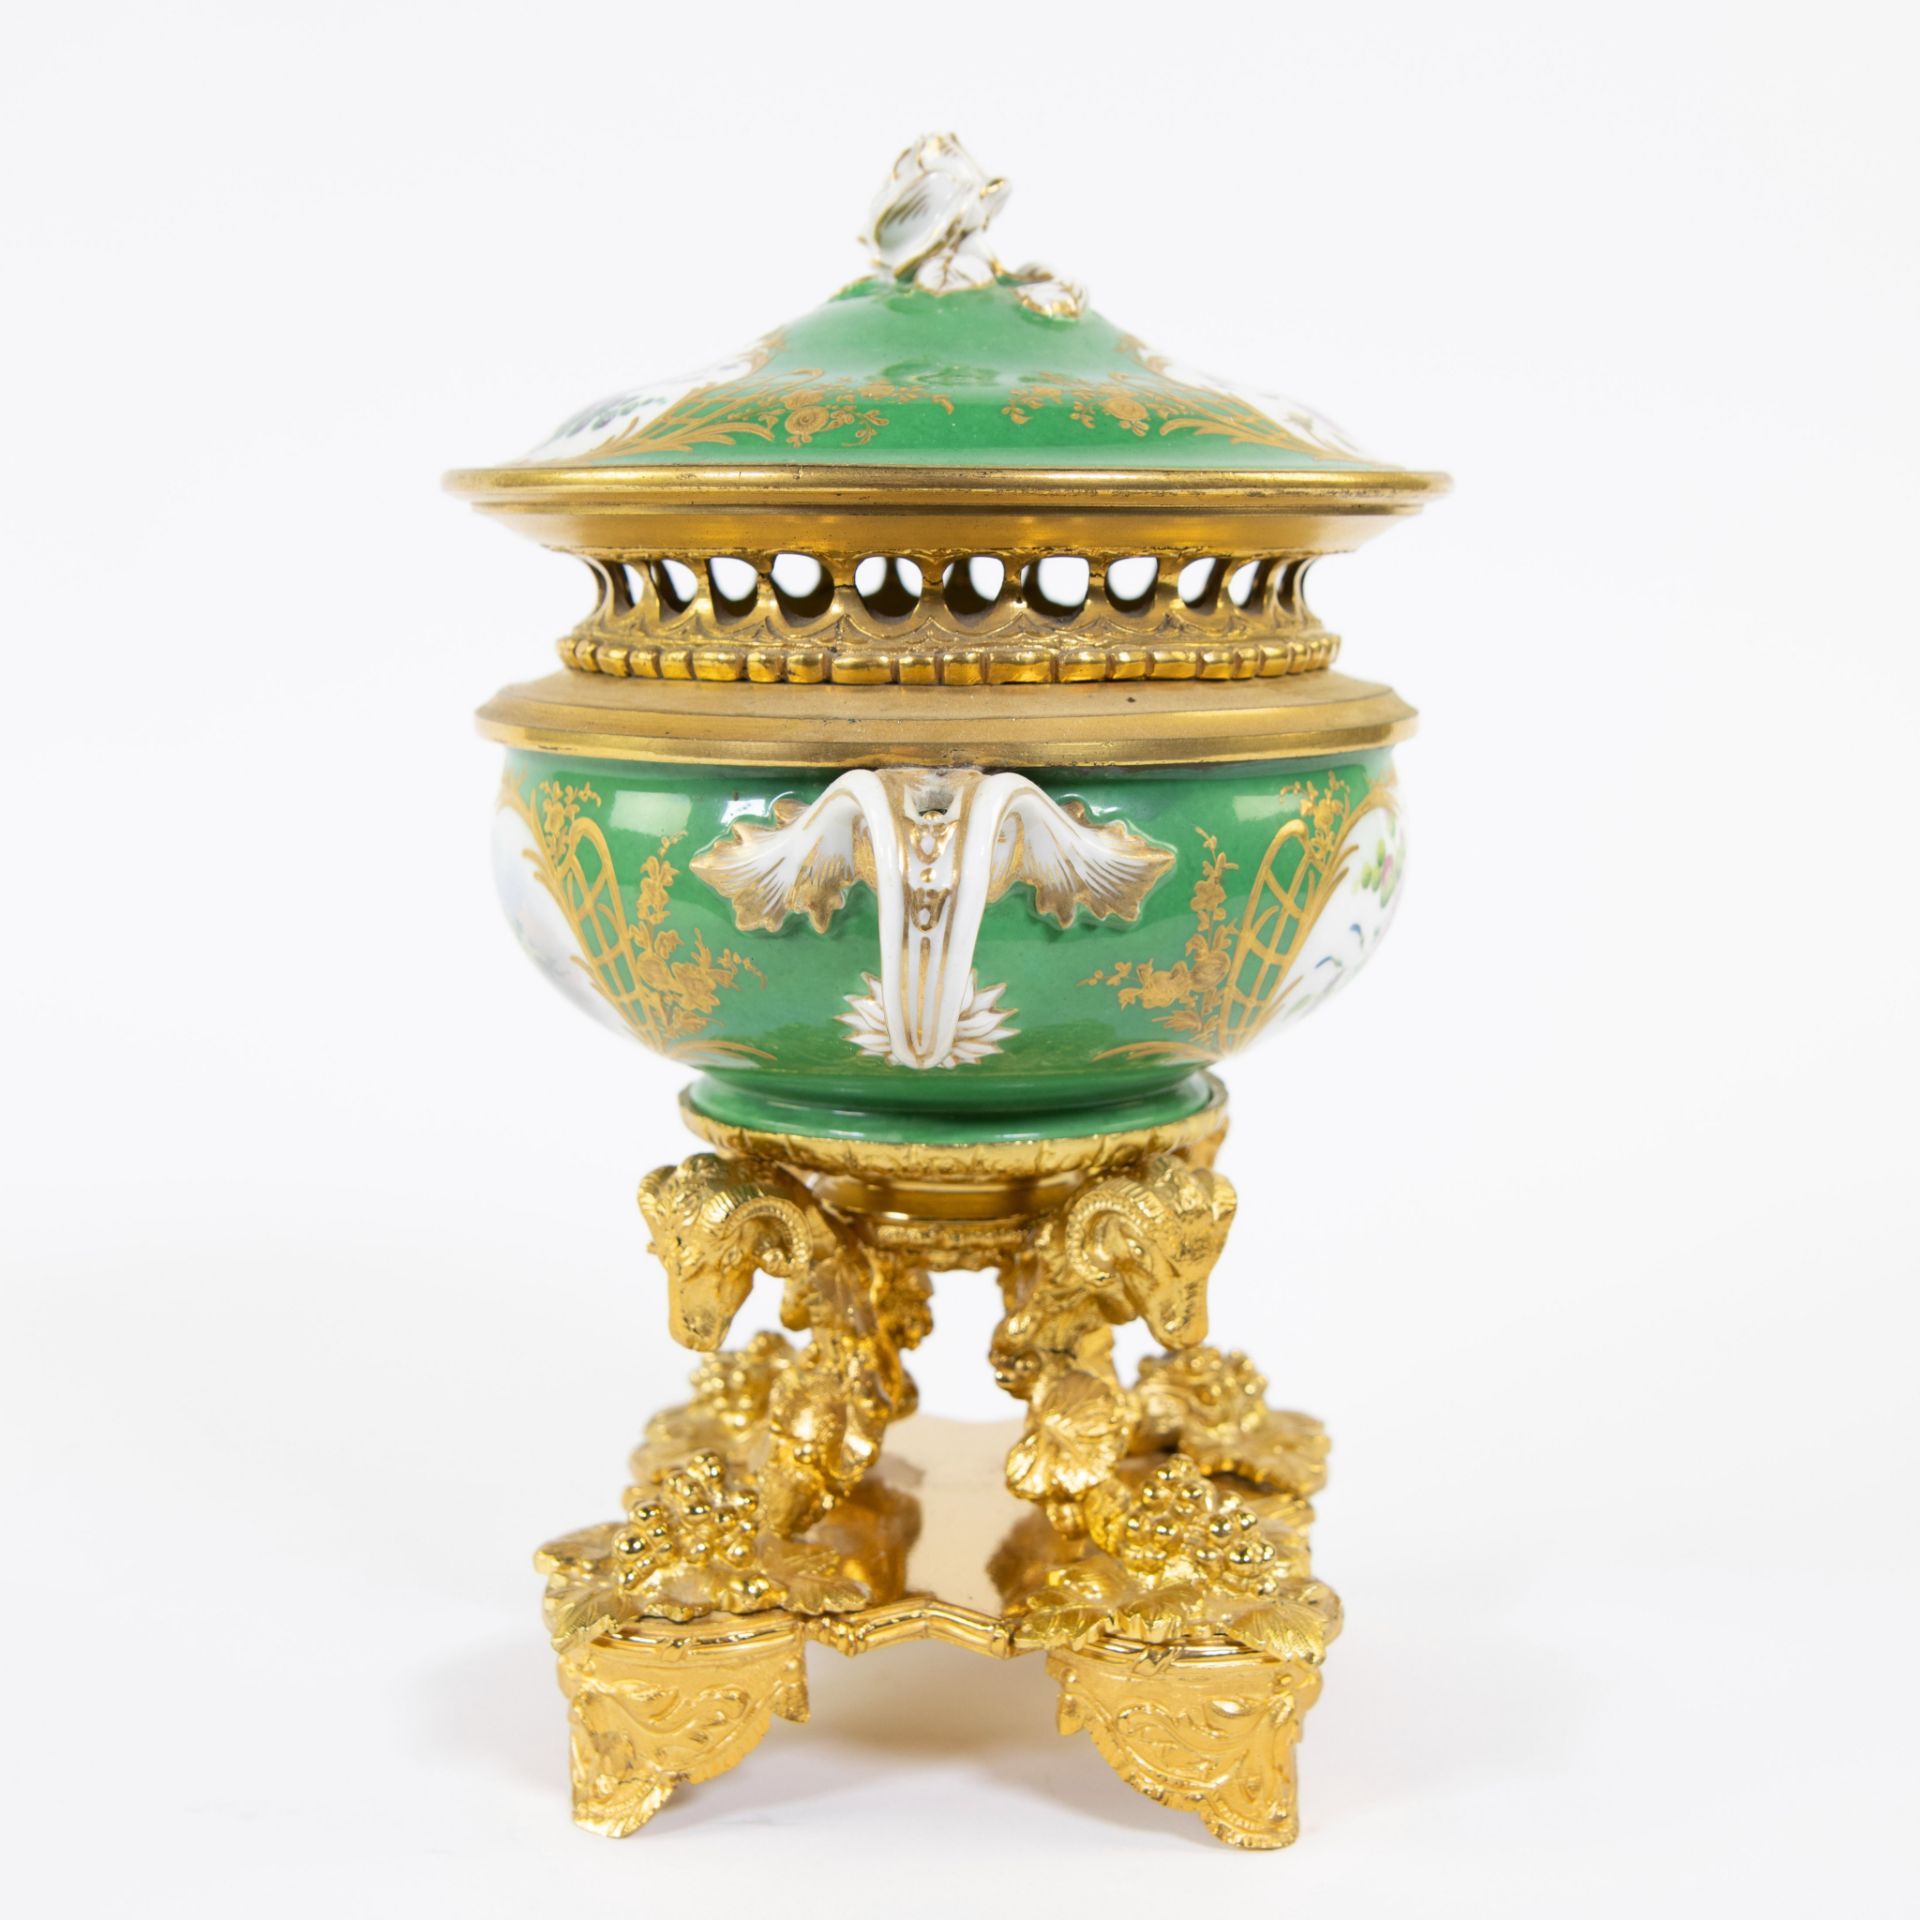 Porcelain table piece with gilt bronze fittings of rams' heads and bunches of grapes. Handpainted wi - Image 3 of 7